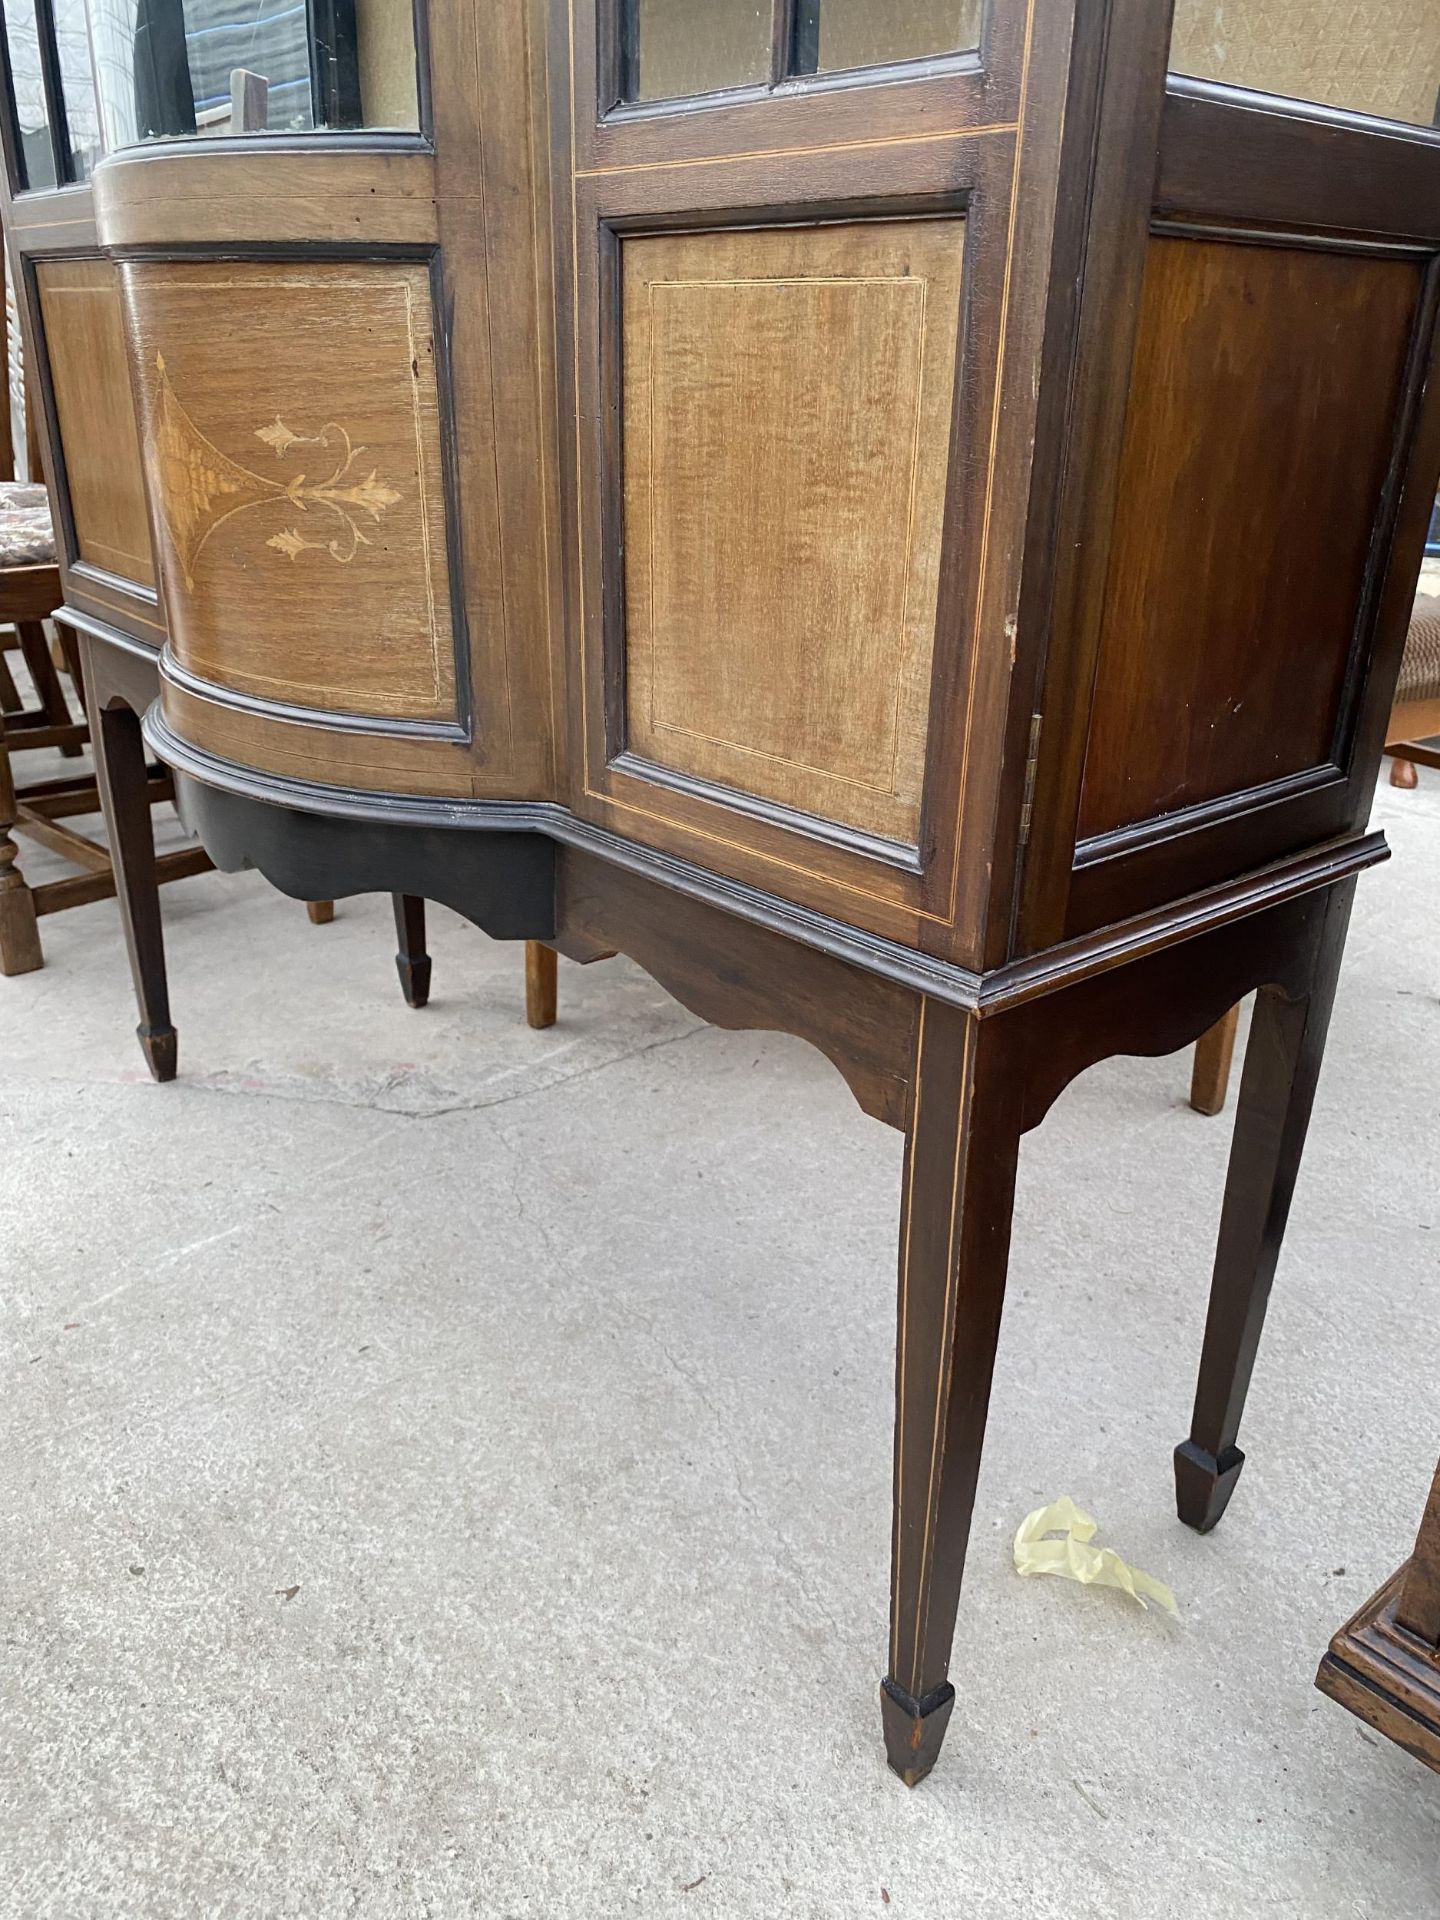 AN EDWARDIAN MAHOGANY AND INLAID BOWFRONTED CHINA DISPLAY CABINET ON TAPERED LEGS, WITH SPADE - Image 3 of 7